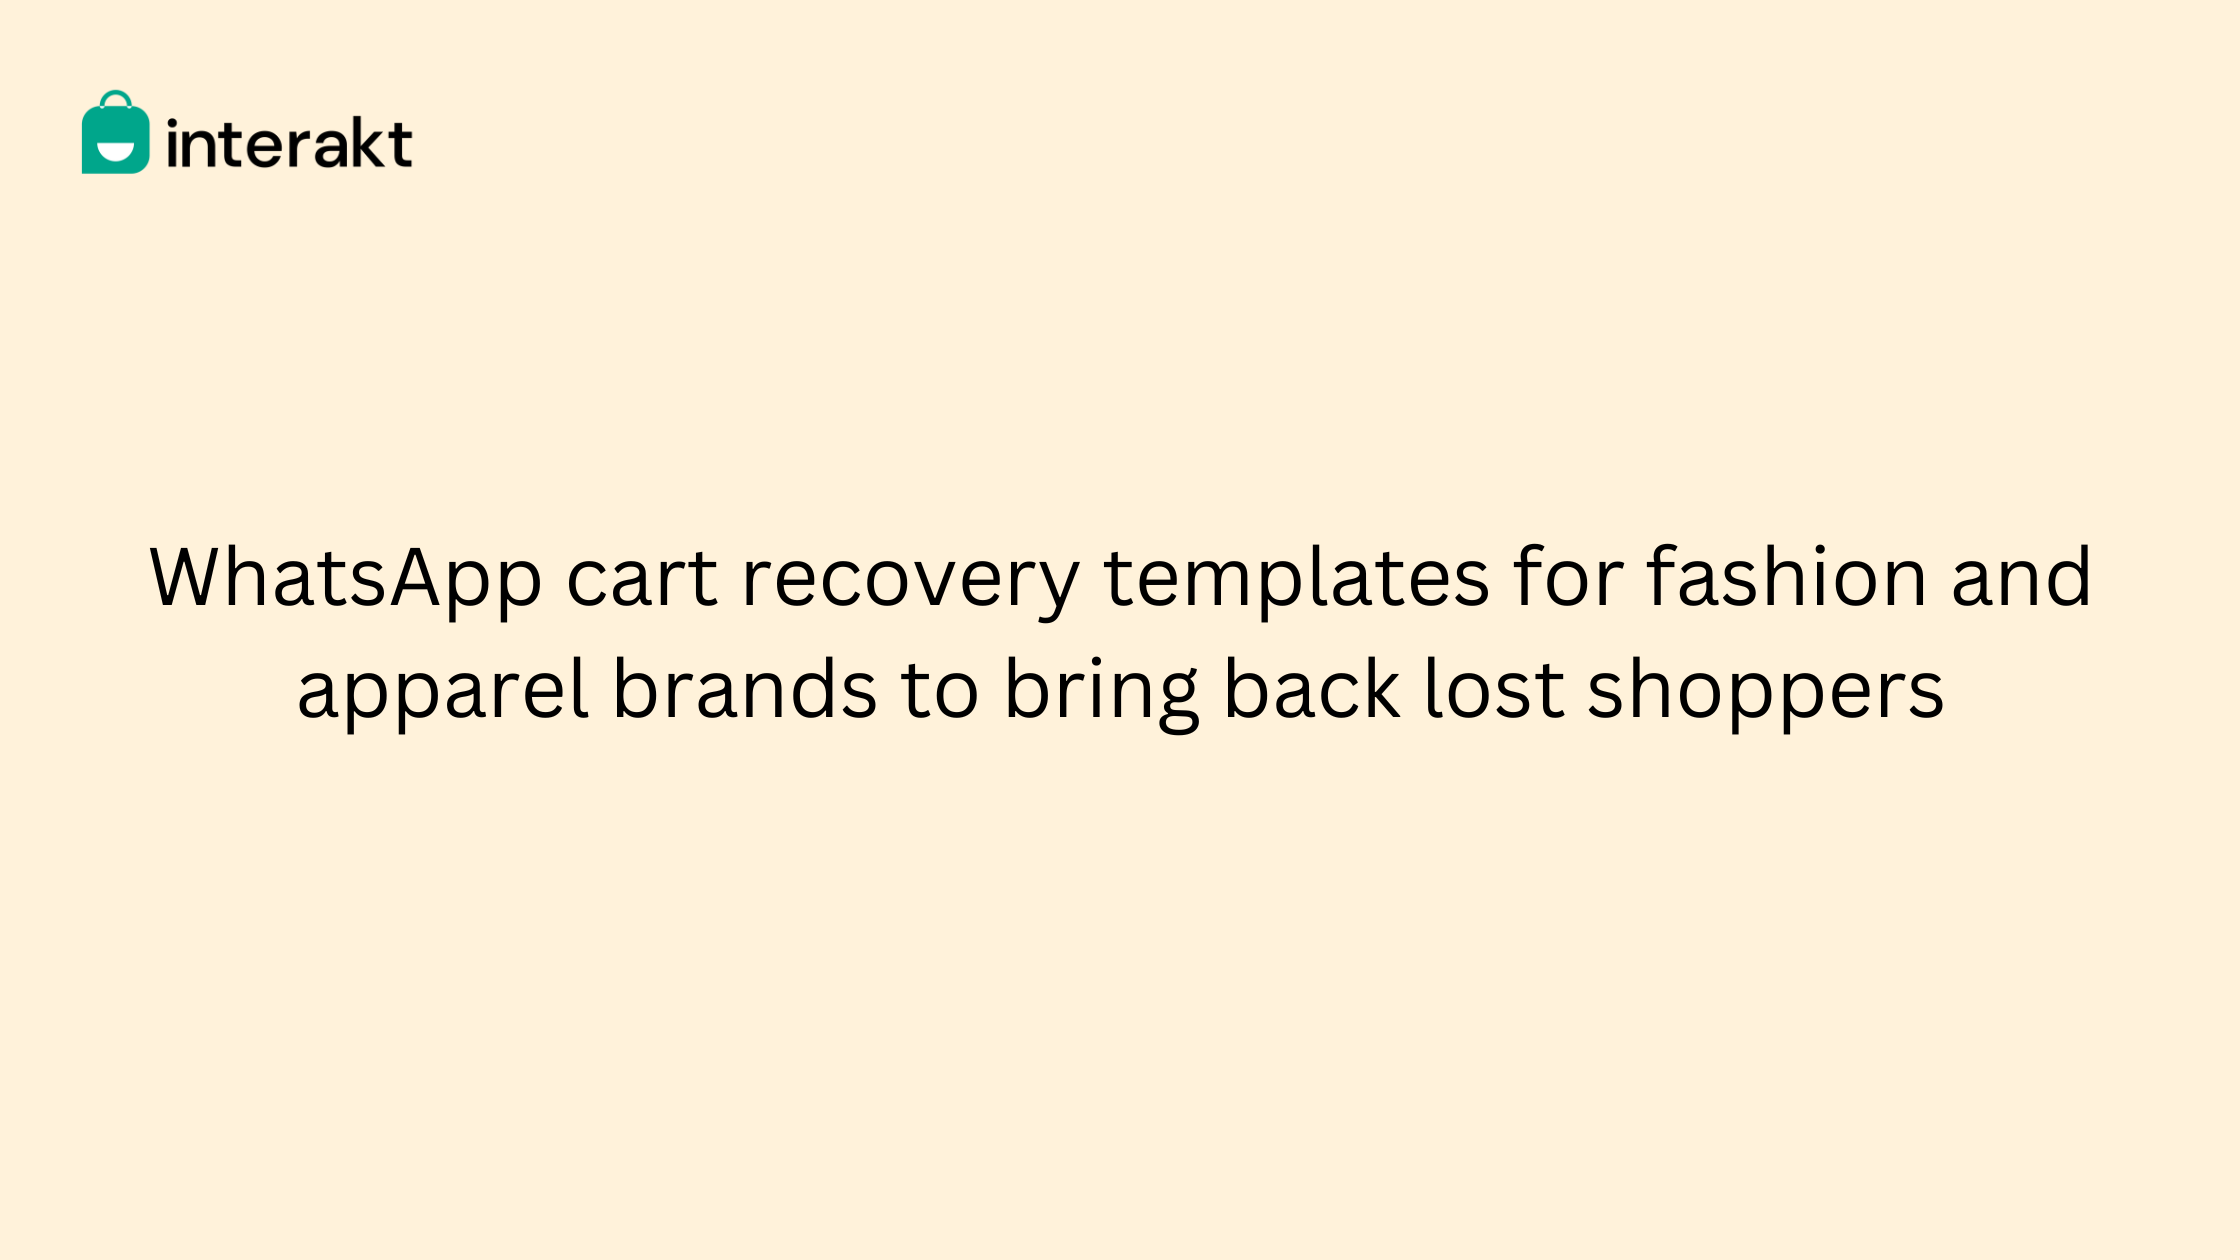 WhatsApp cart recovery templates for fashion and apparel brands to bring back lost shoppers